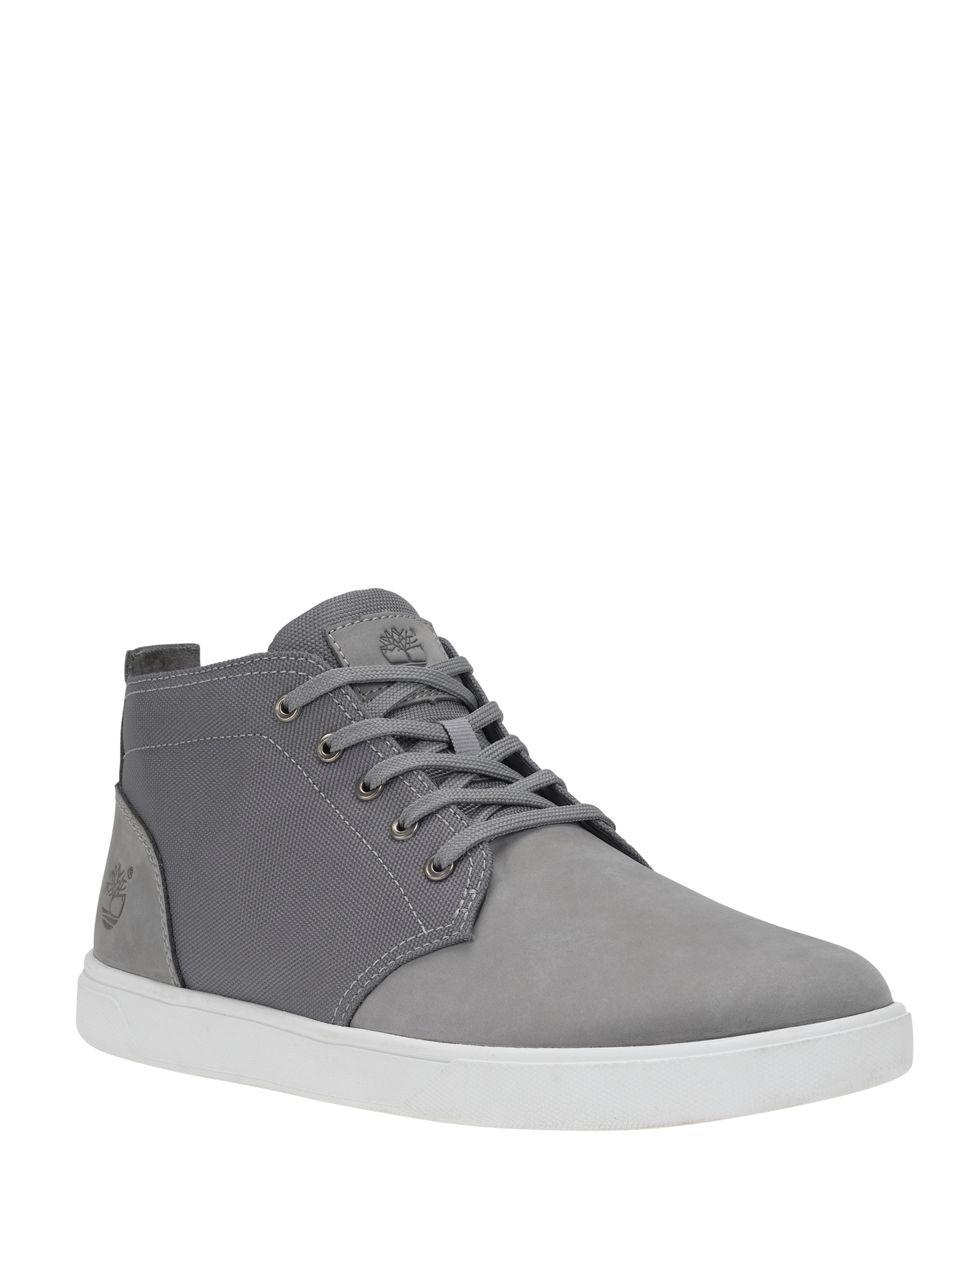 Timberland Groveton Chukka Leather Sneakers in Gray for Men | Lyst